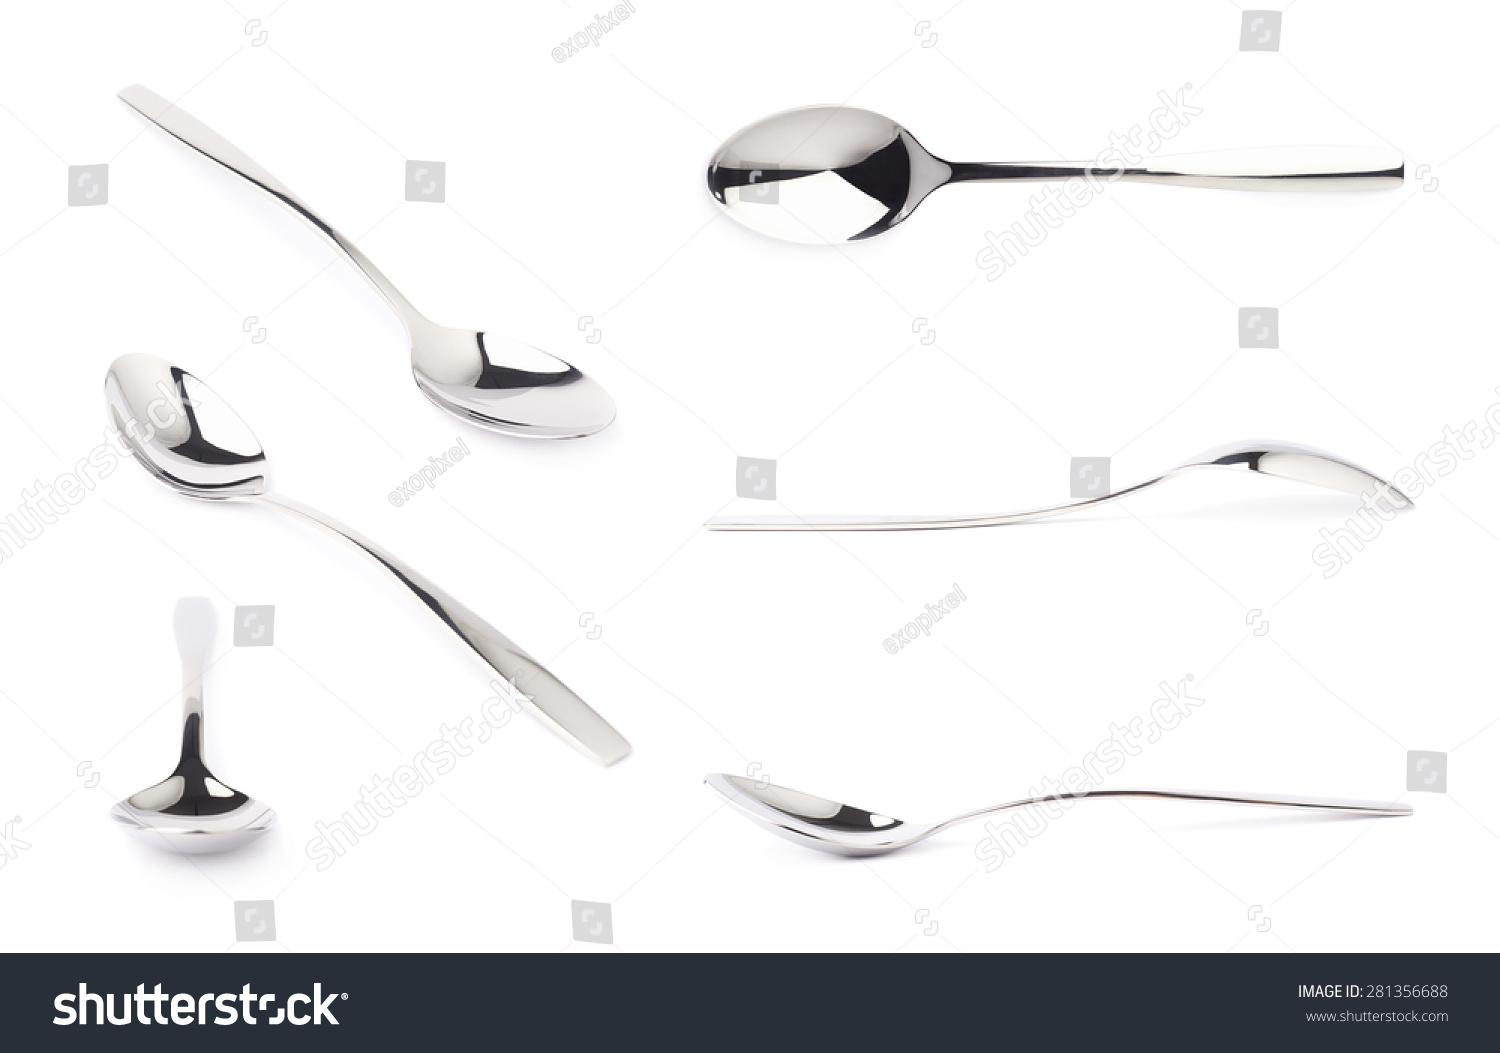 Stainless steel glossy metal kitchen spoon isolated over the white background, set of multiple different foreshortenings #281356688